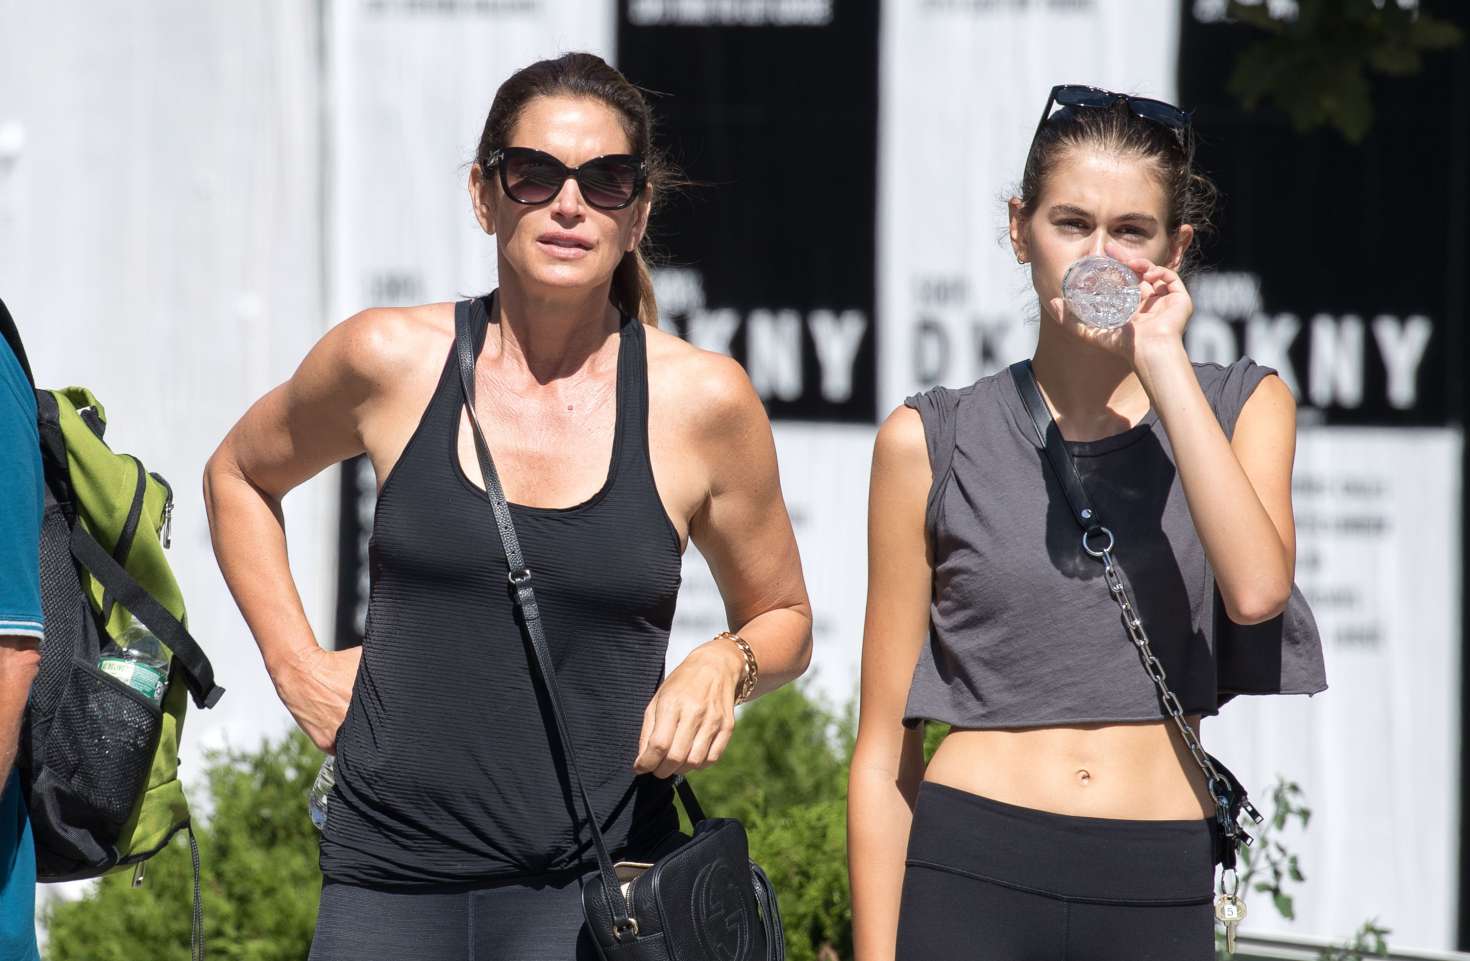 Cindy Crawford and Kaia Gerber â€“ Leaving the gym in New York City